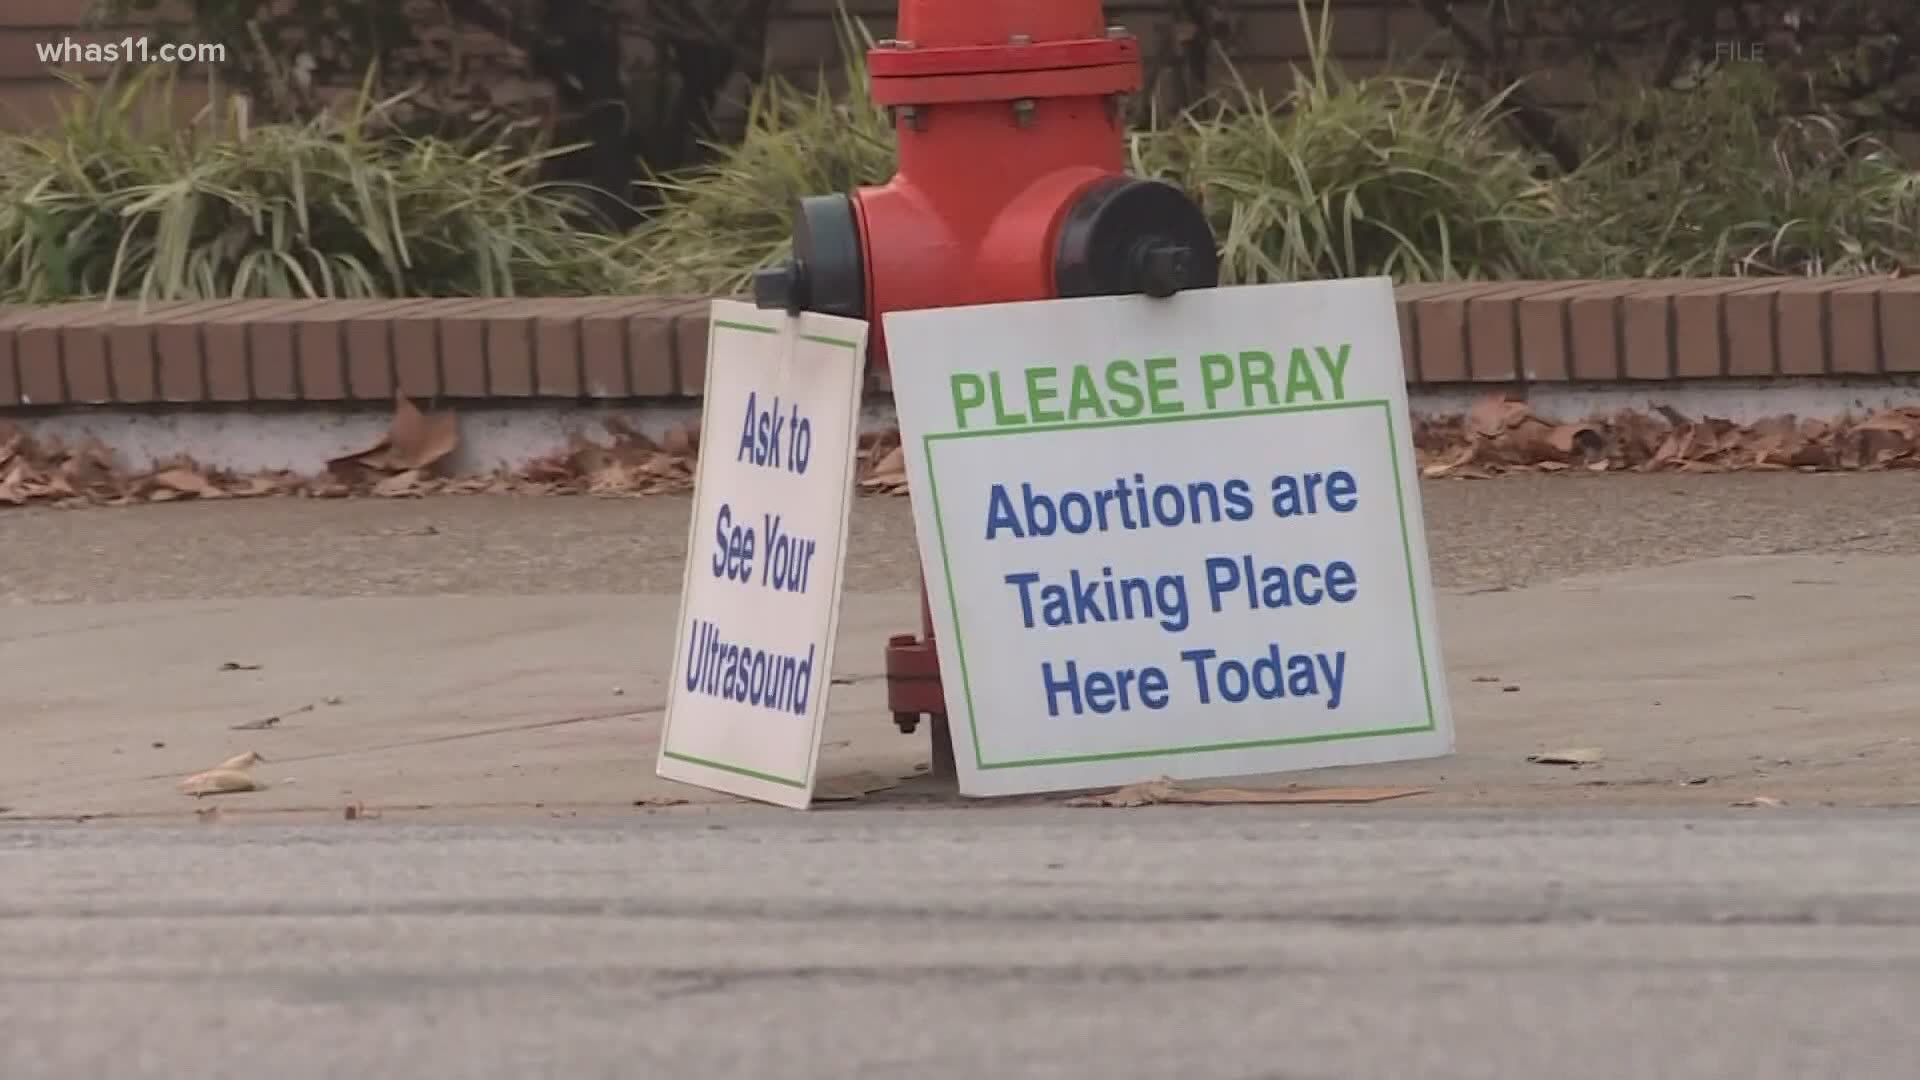 Sisters for Life and Kentucky Right to Life have filed a lawsuit, arguing the ordinance prevents them from handing out resources to women at the abortion clinic.